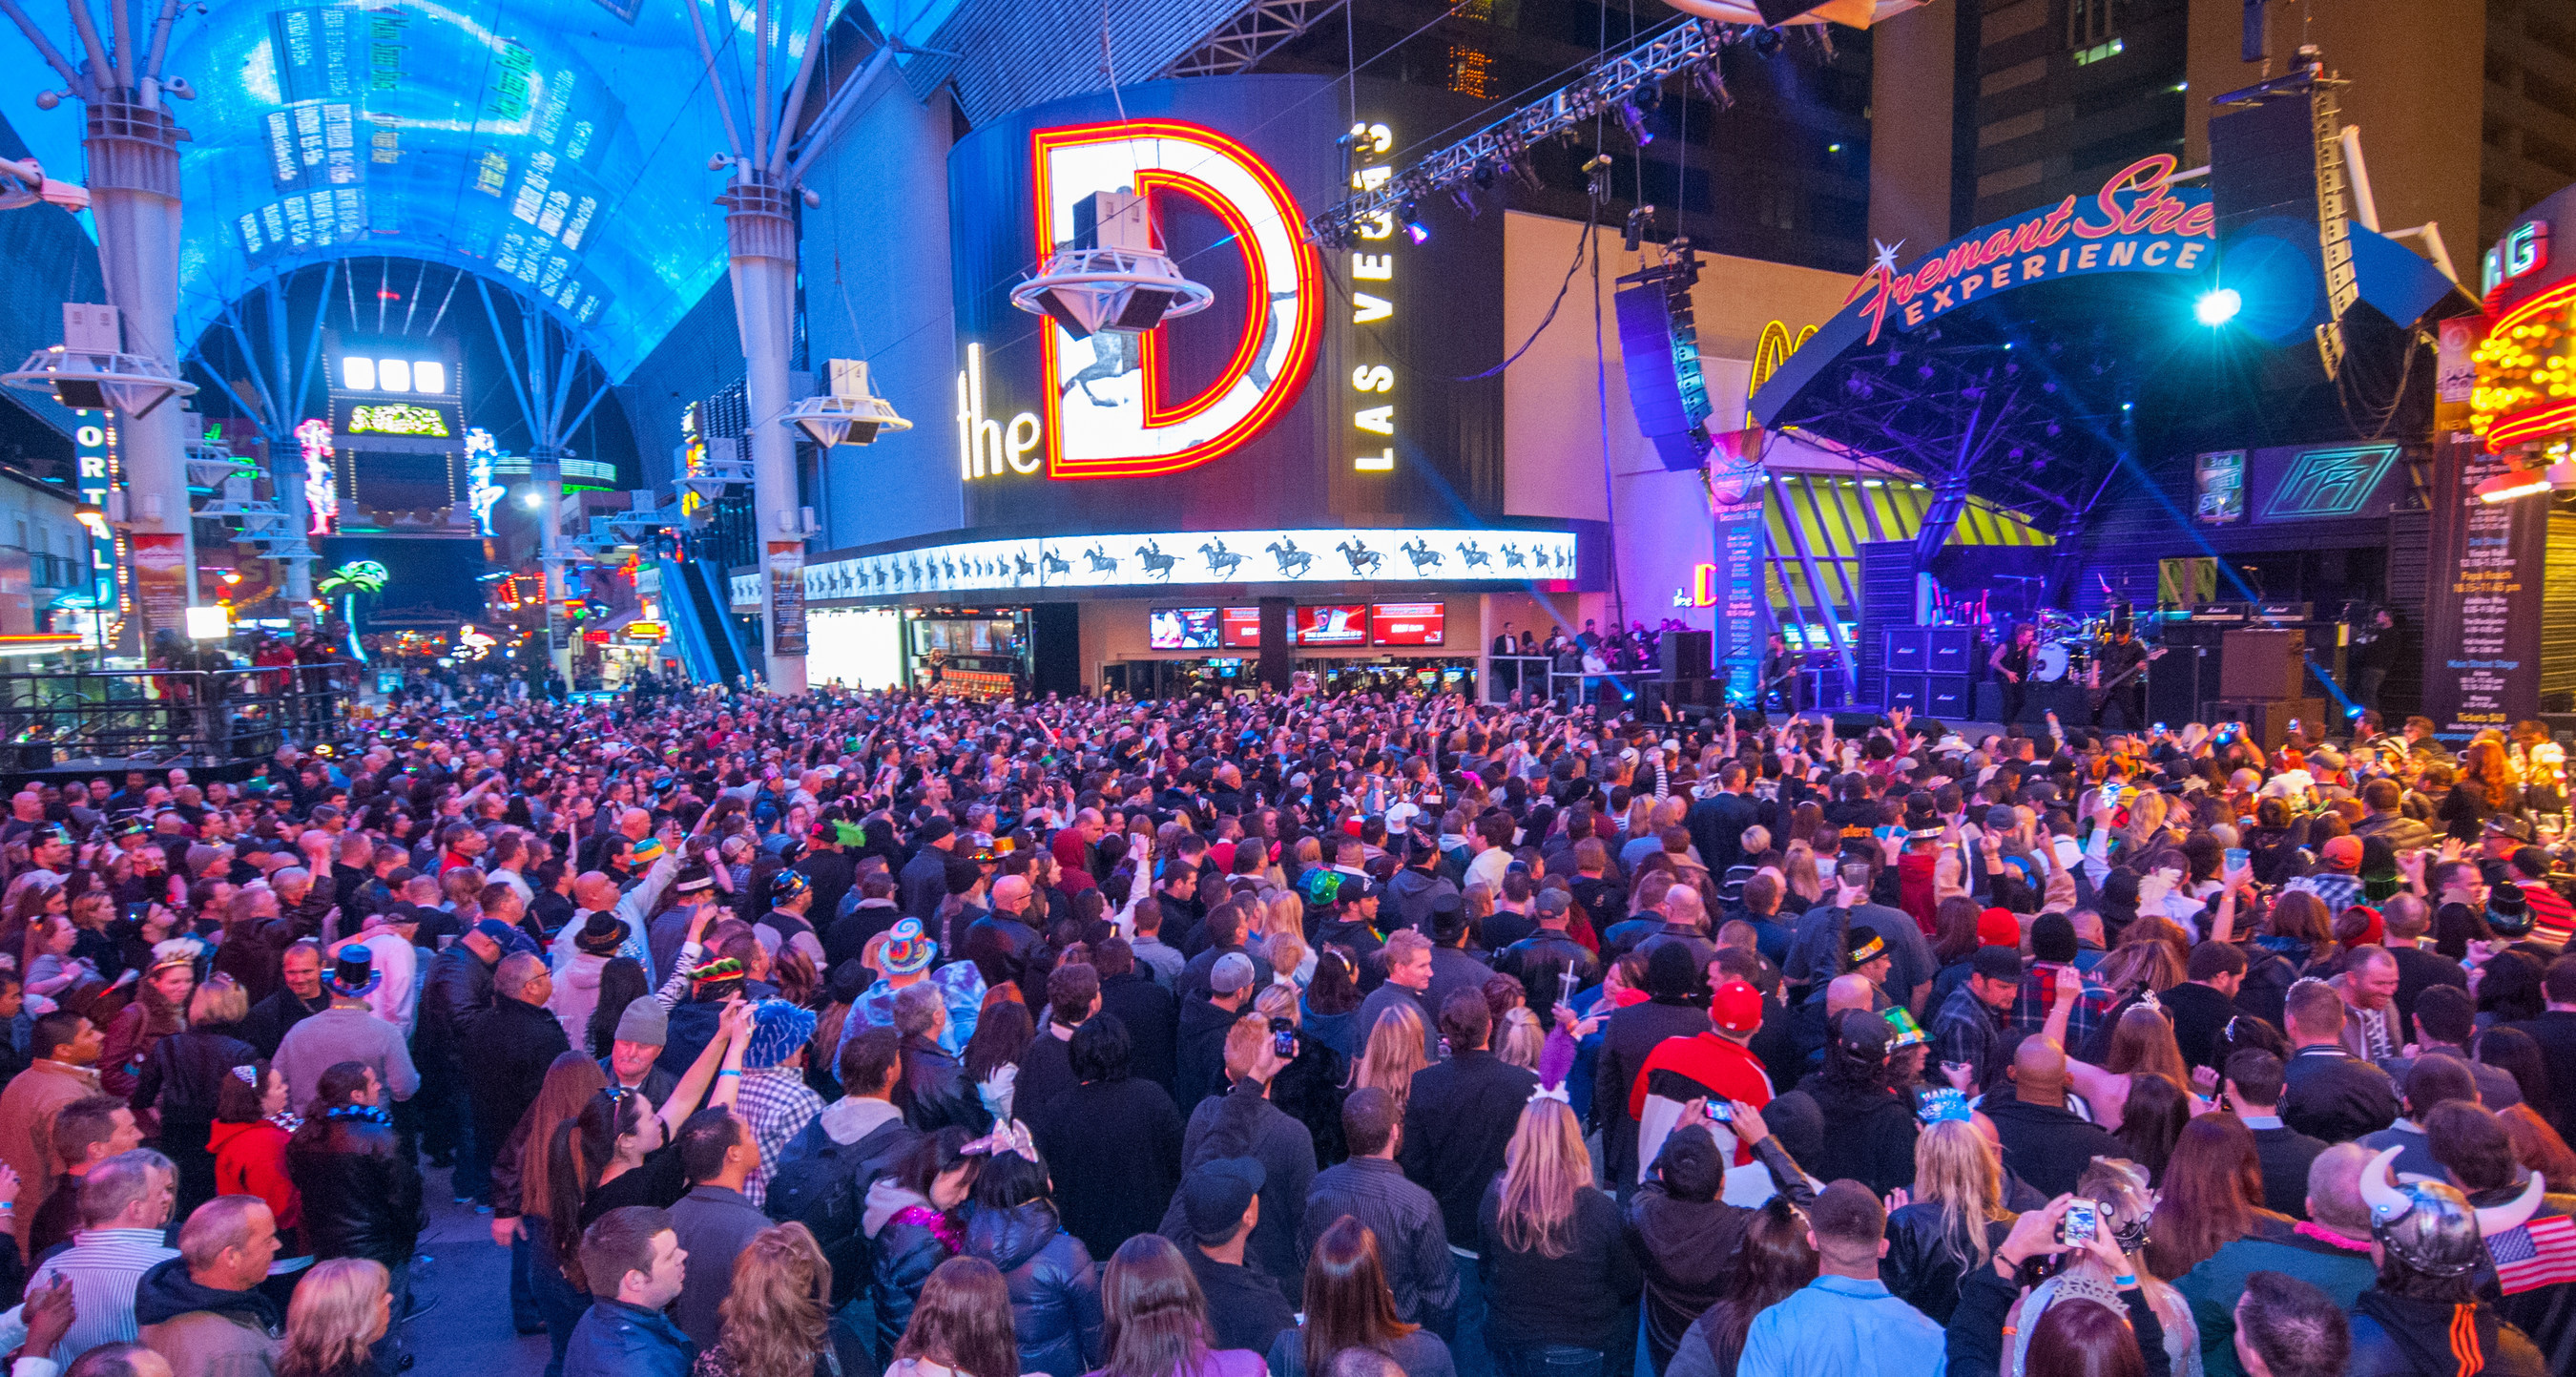 Thousands gather at one of Fremont Street Experience's Concerts